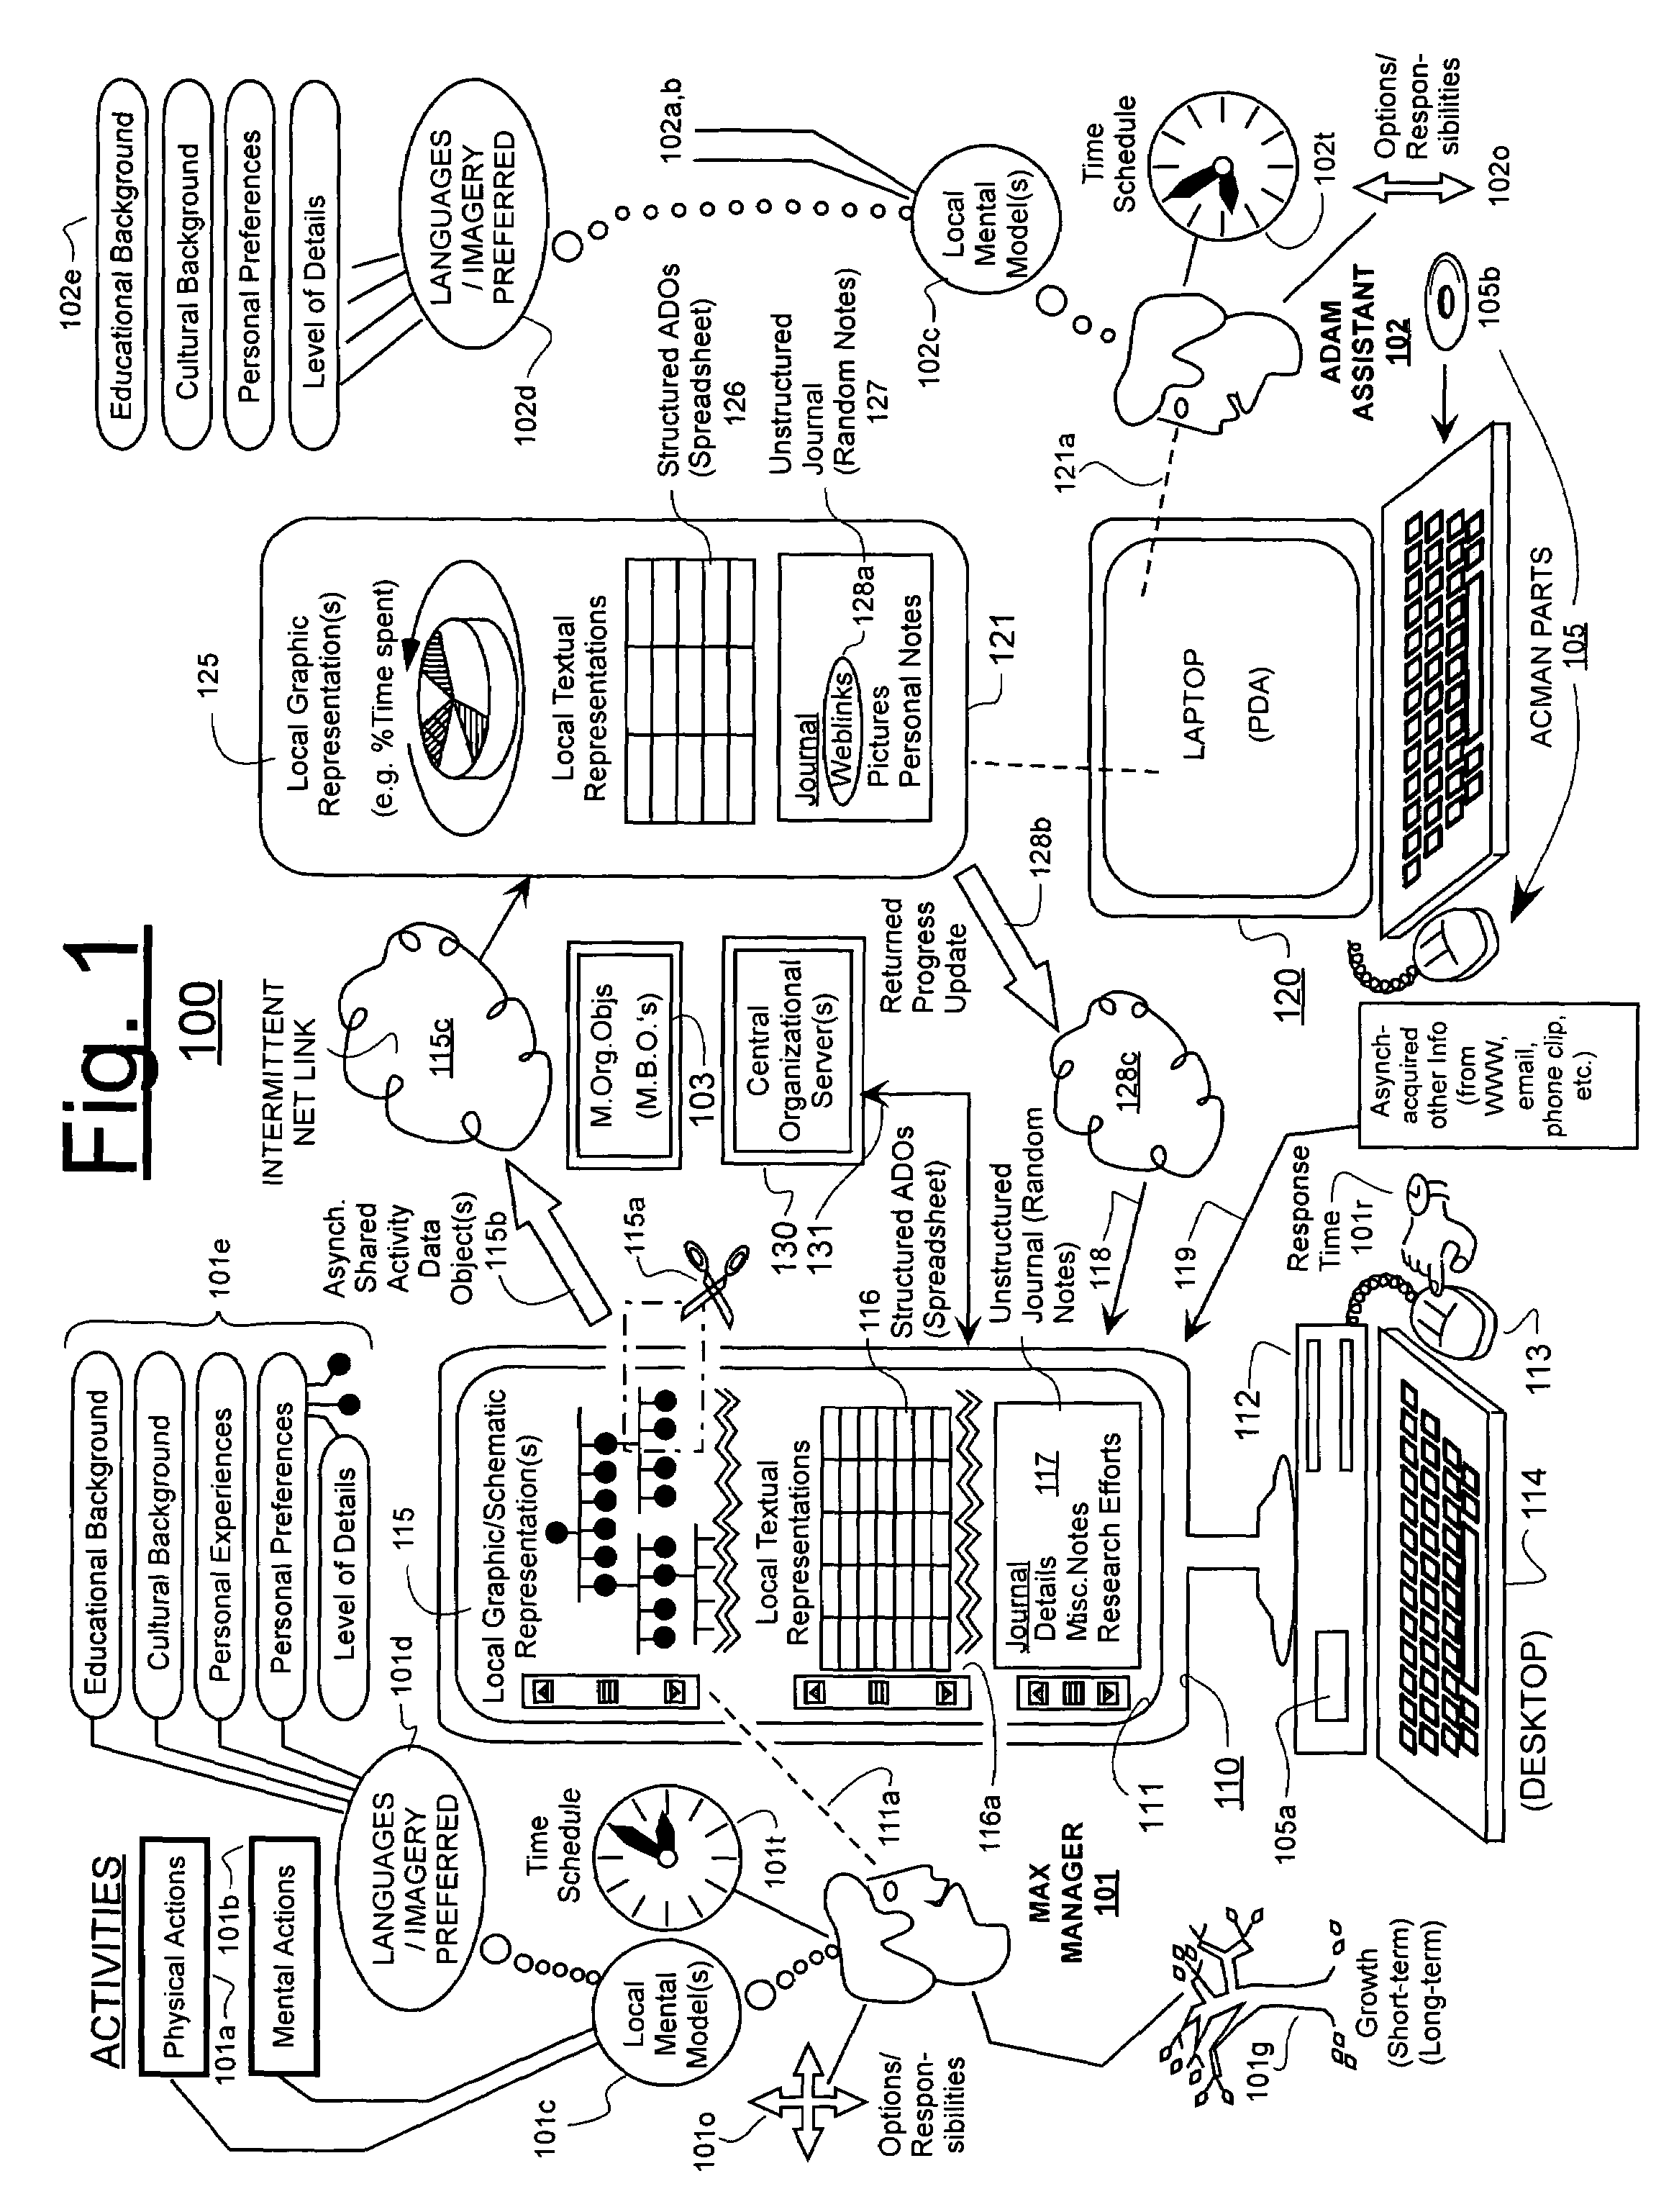 Machine-implemented activity management system using asynchronously shared activity data objects and journal data items